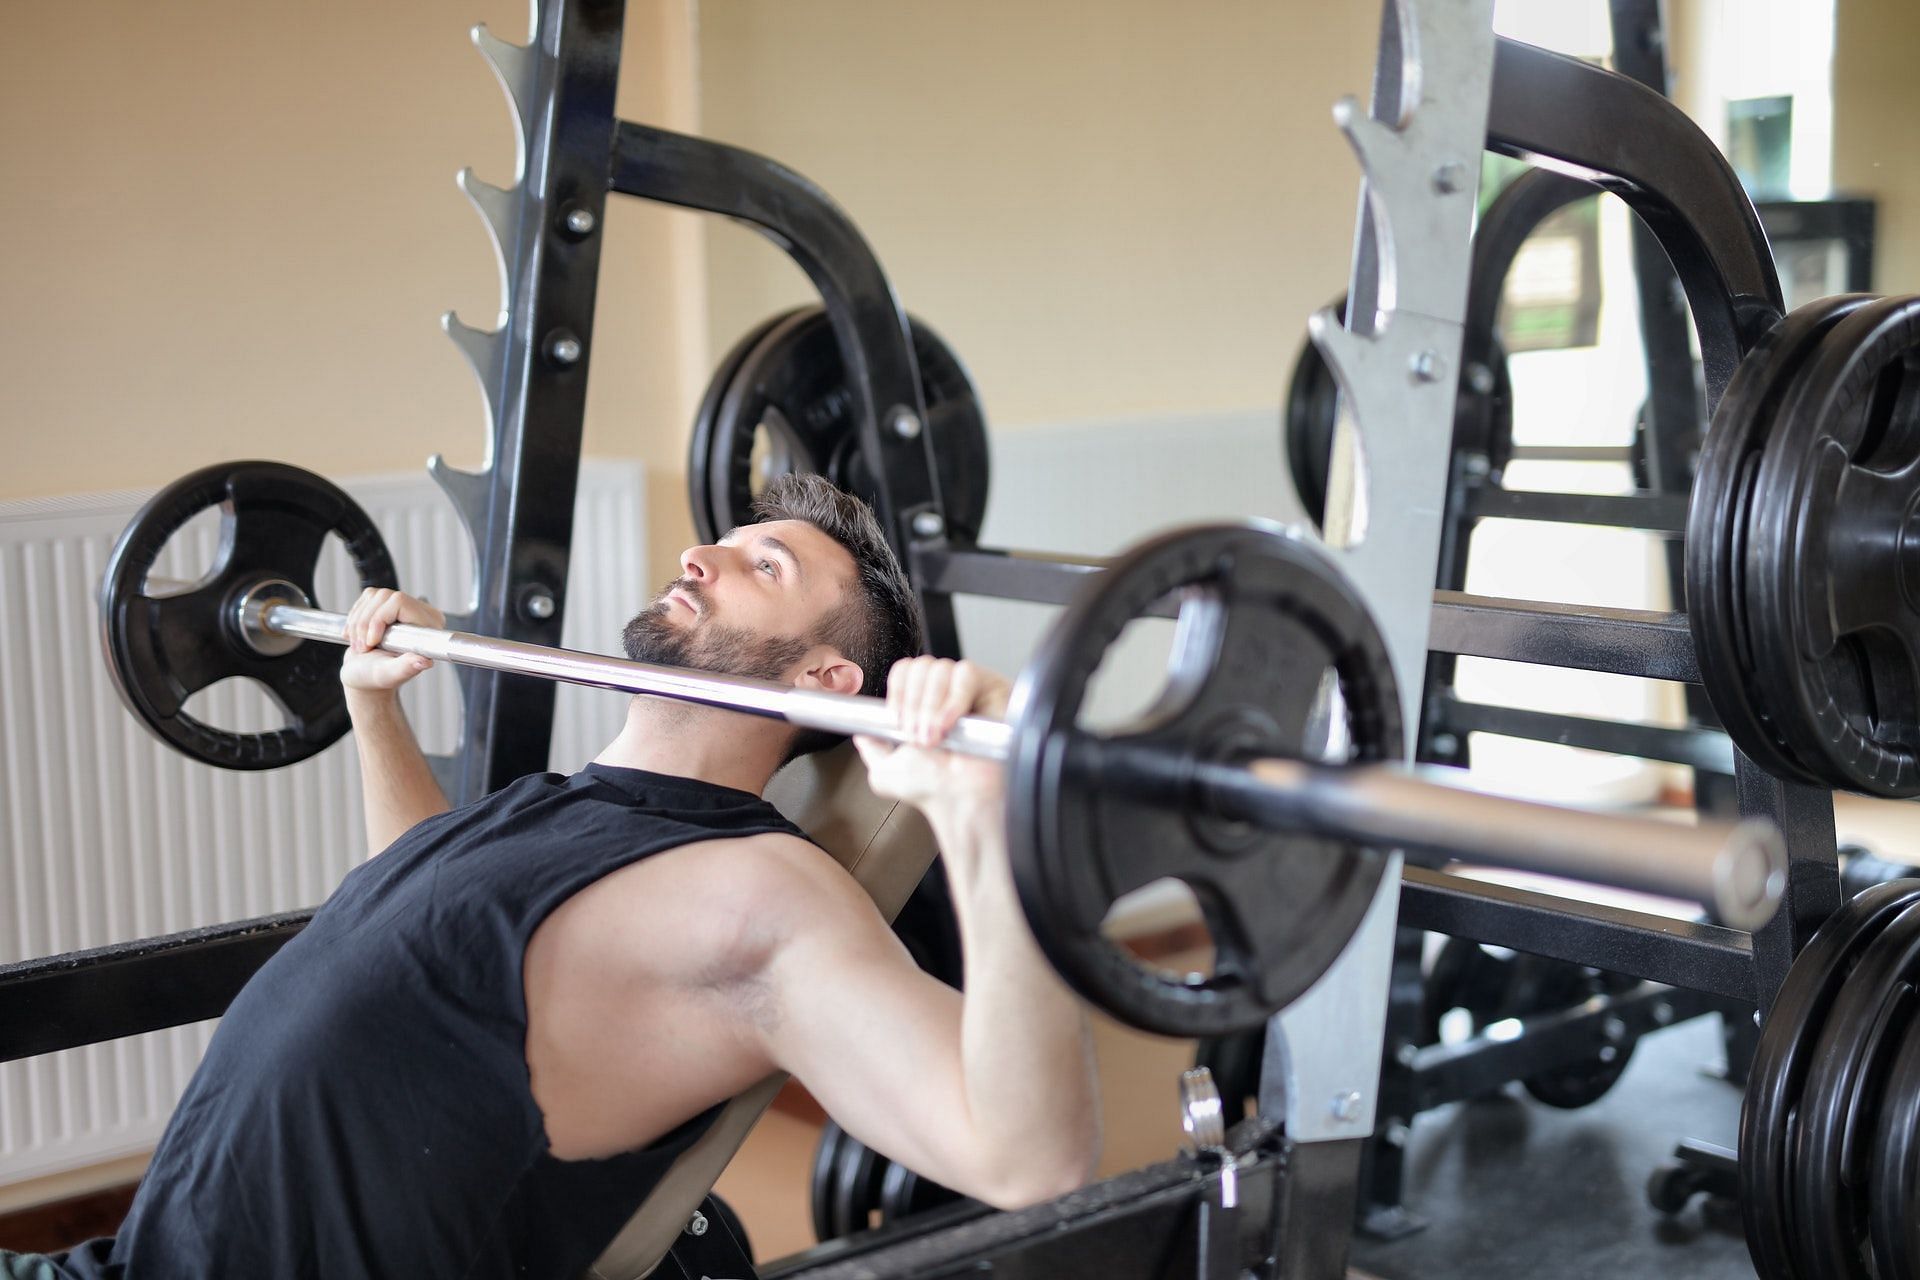 Guide to improving the bench press. (Image via Pexels/Photo by Andrea Piacquadio)